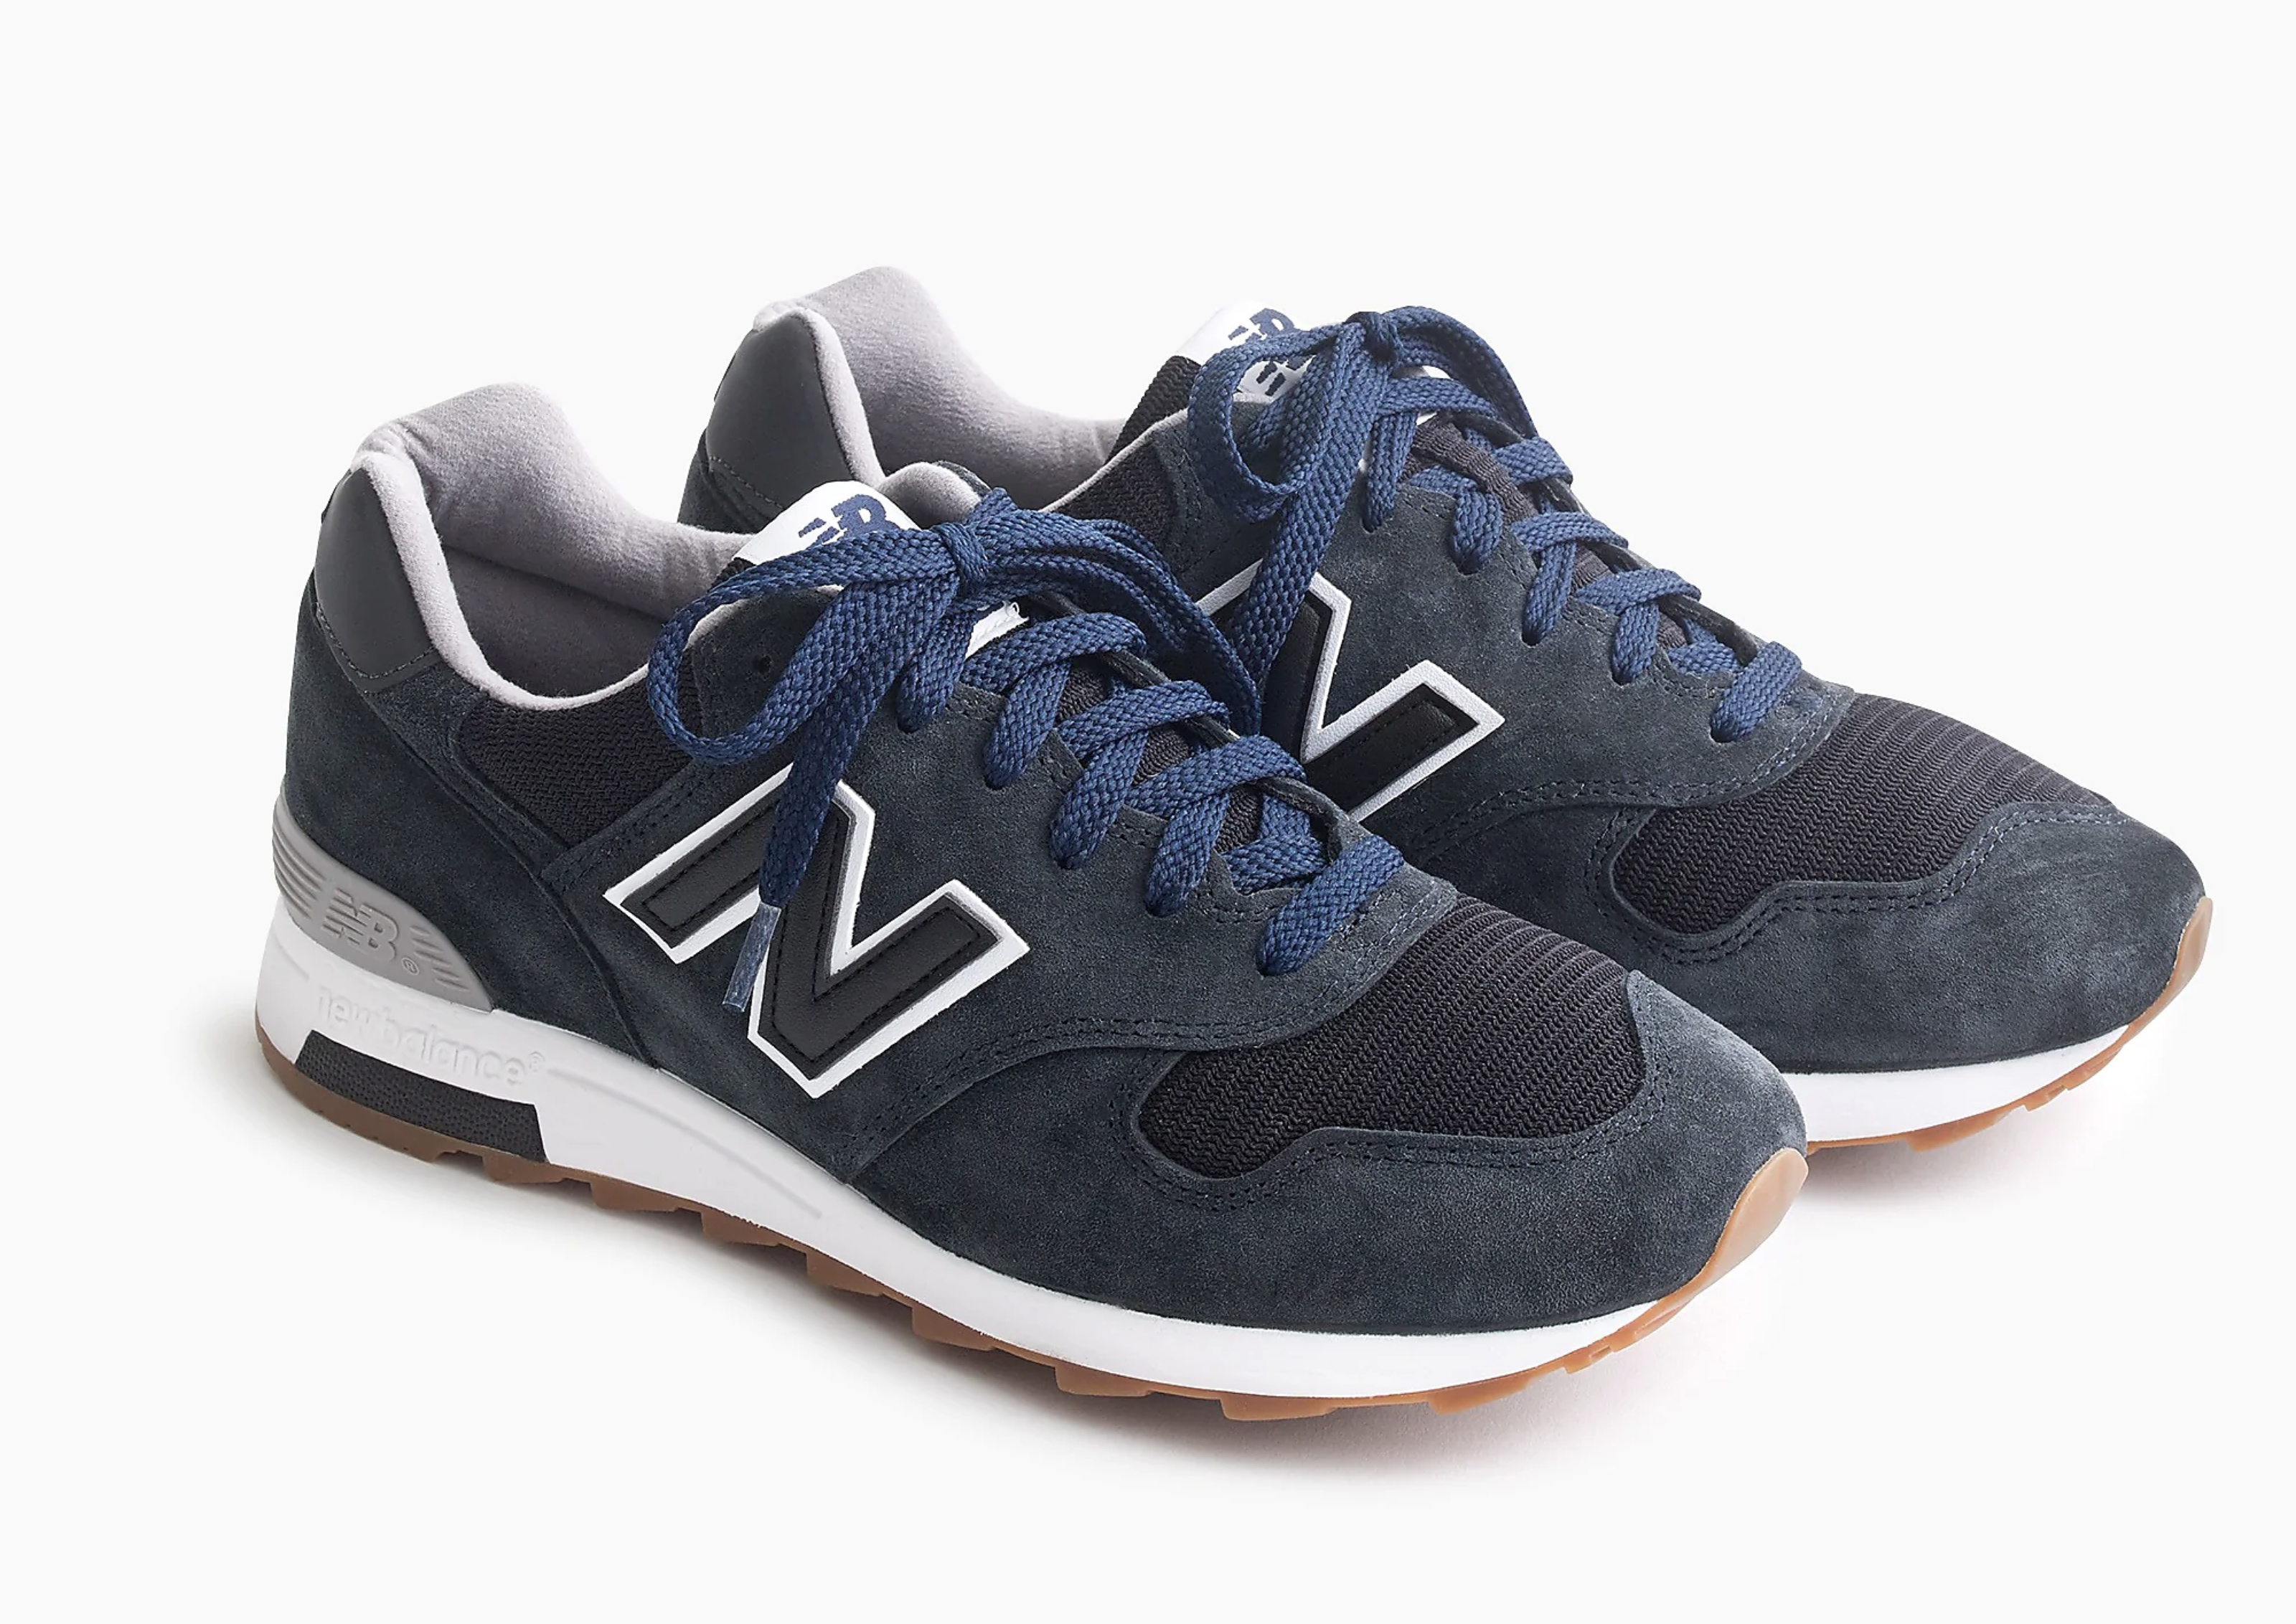 J.Crew Balance 1400 Returns in Midnight and Navy Steel - - Notes